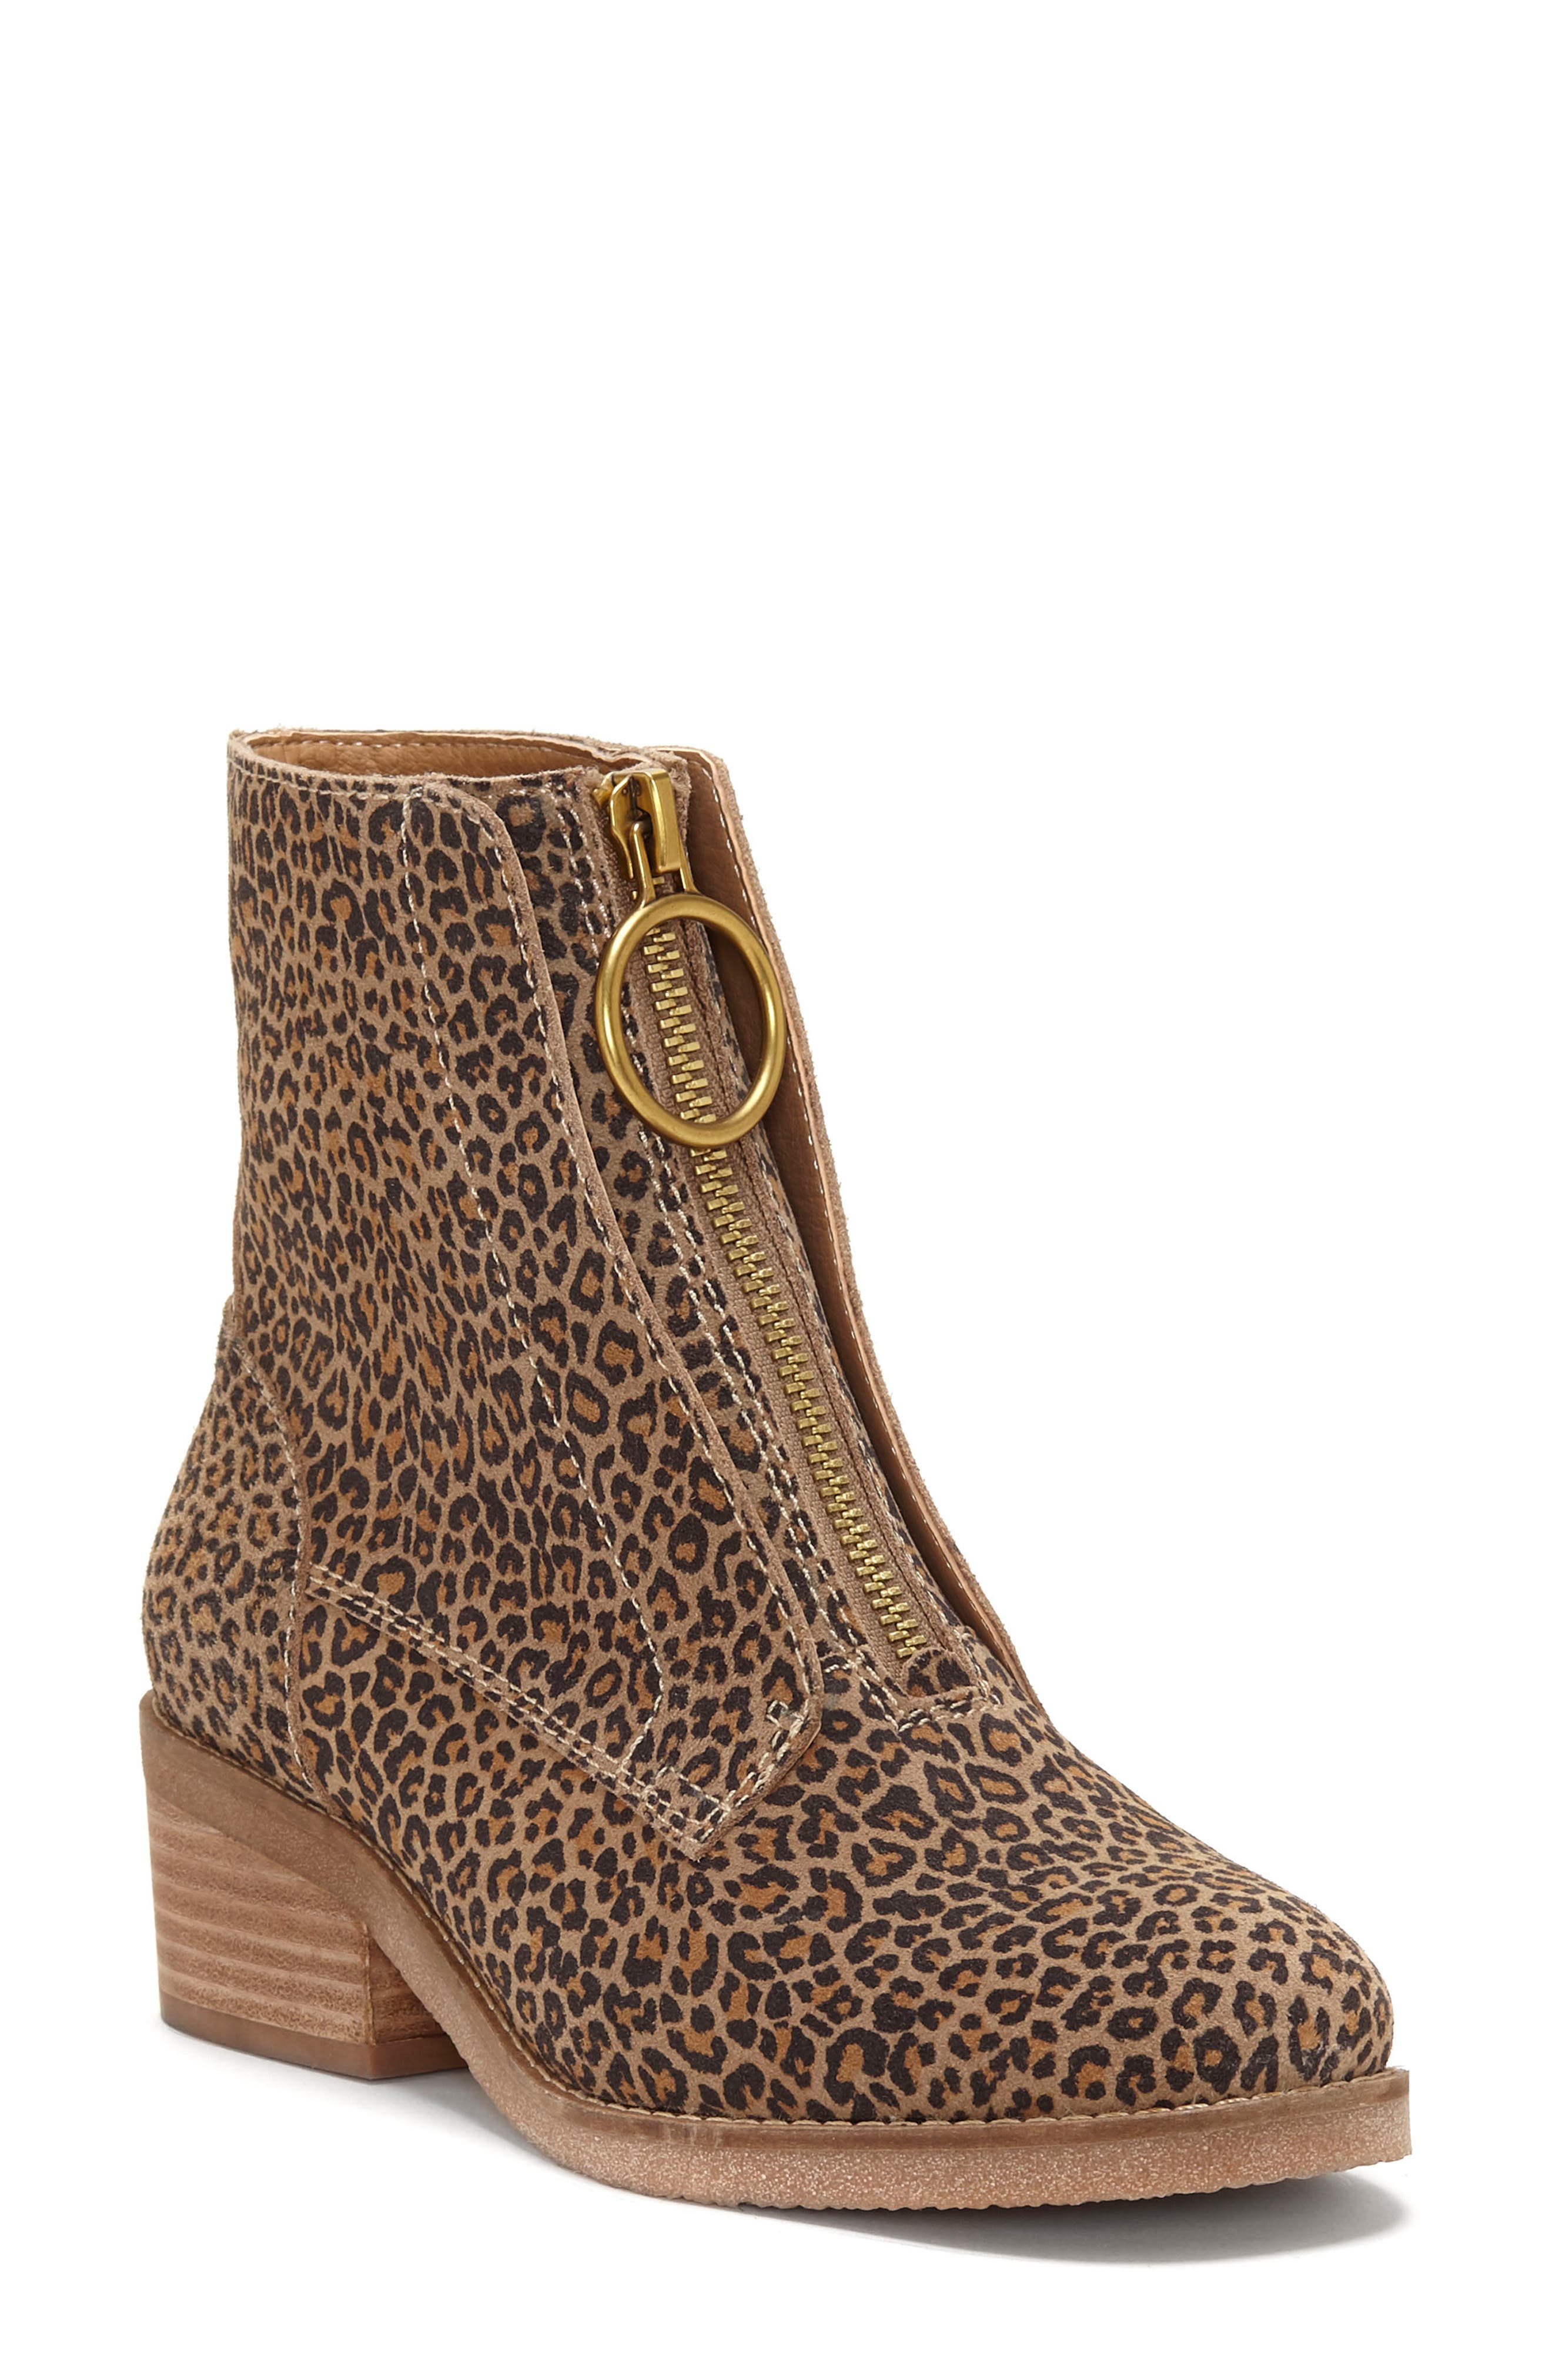 lucky brand women's tibly booties